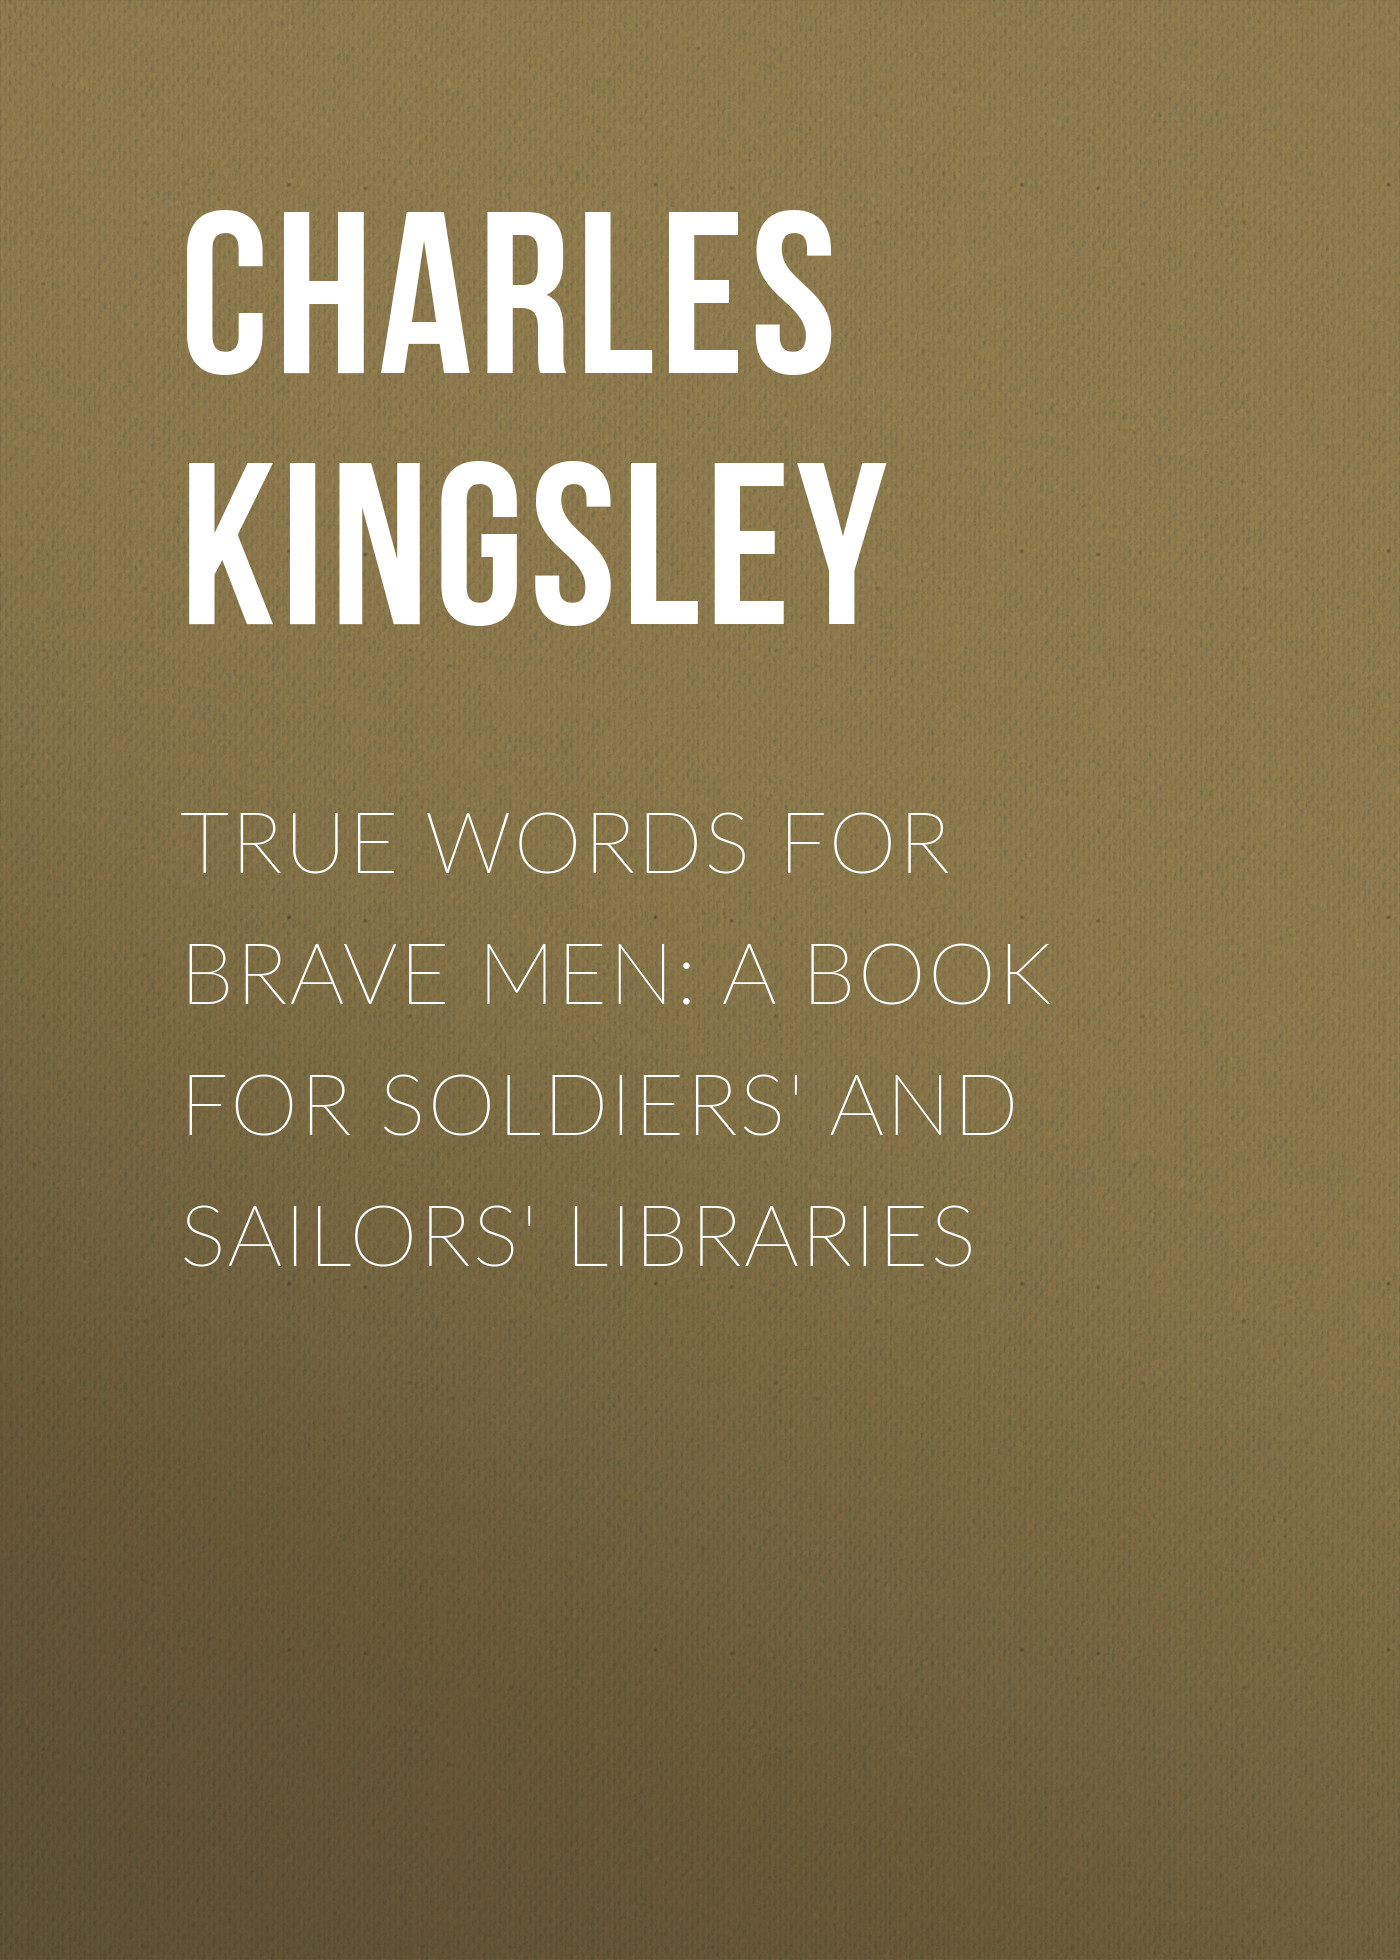 True Words for Brave Men: A Book for Soldiers'and Sailors'Libraries